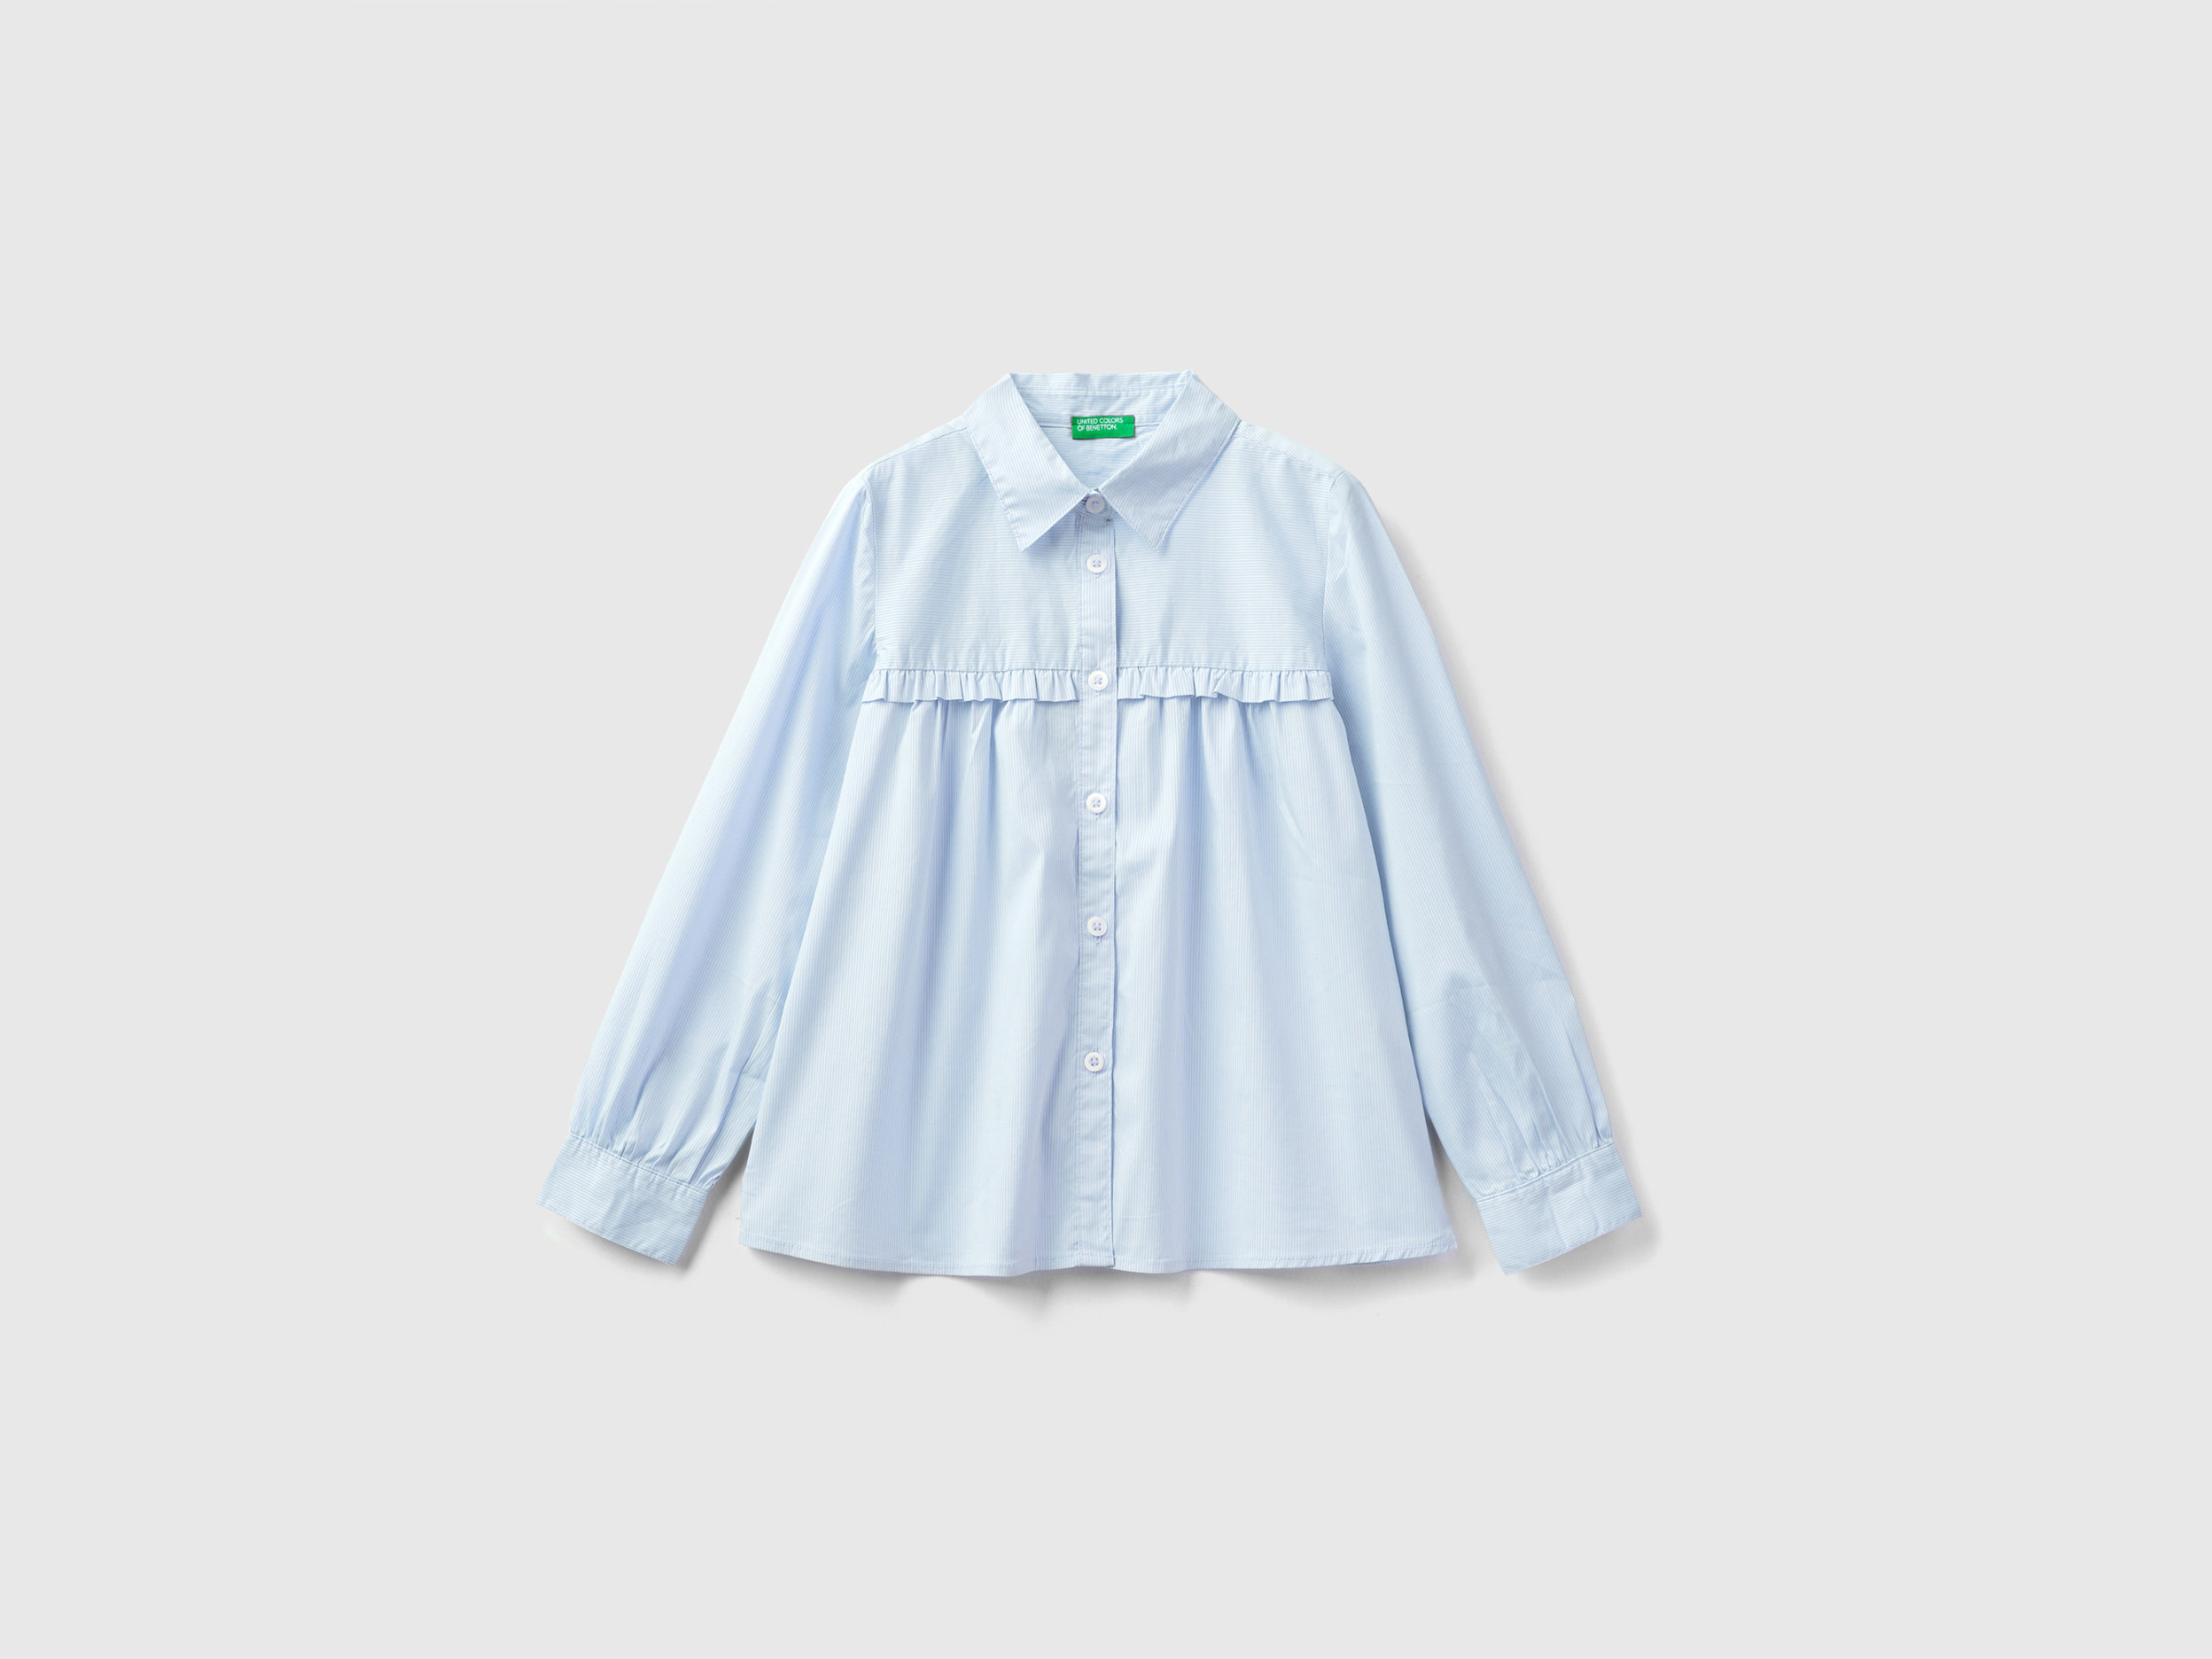 Benetton, Shirt With Rouches On The Yoke, size S, Sky Blue, Kids